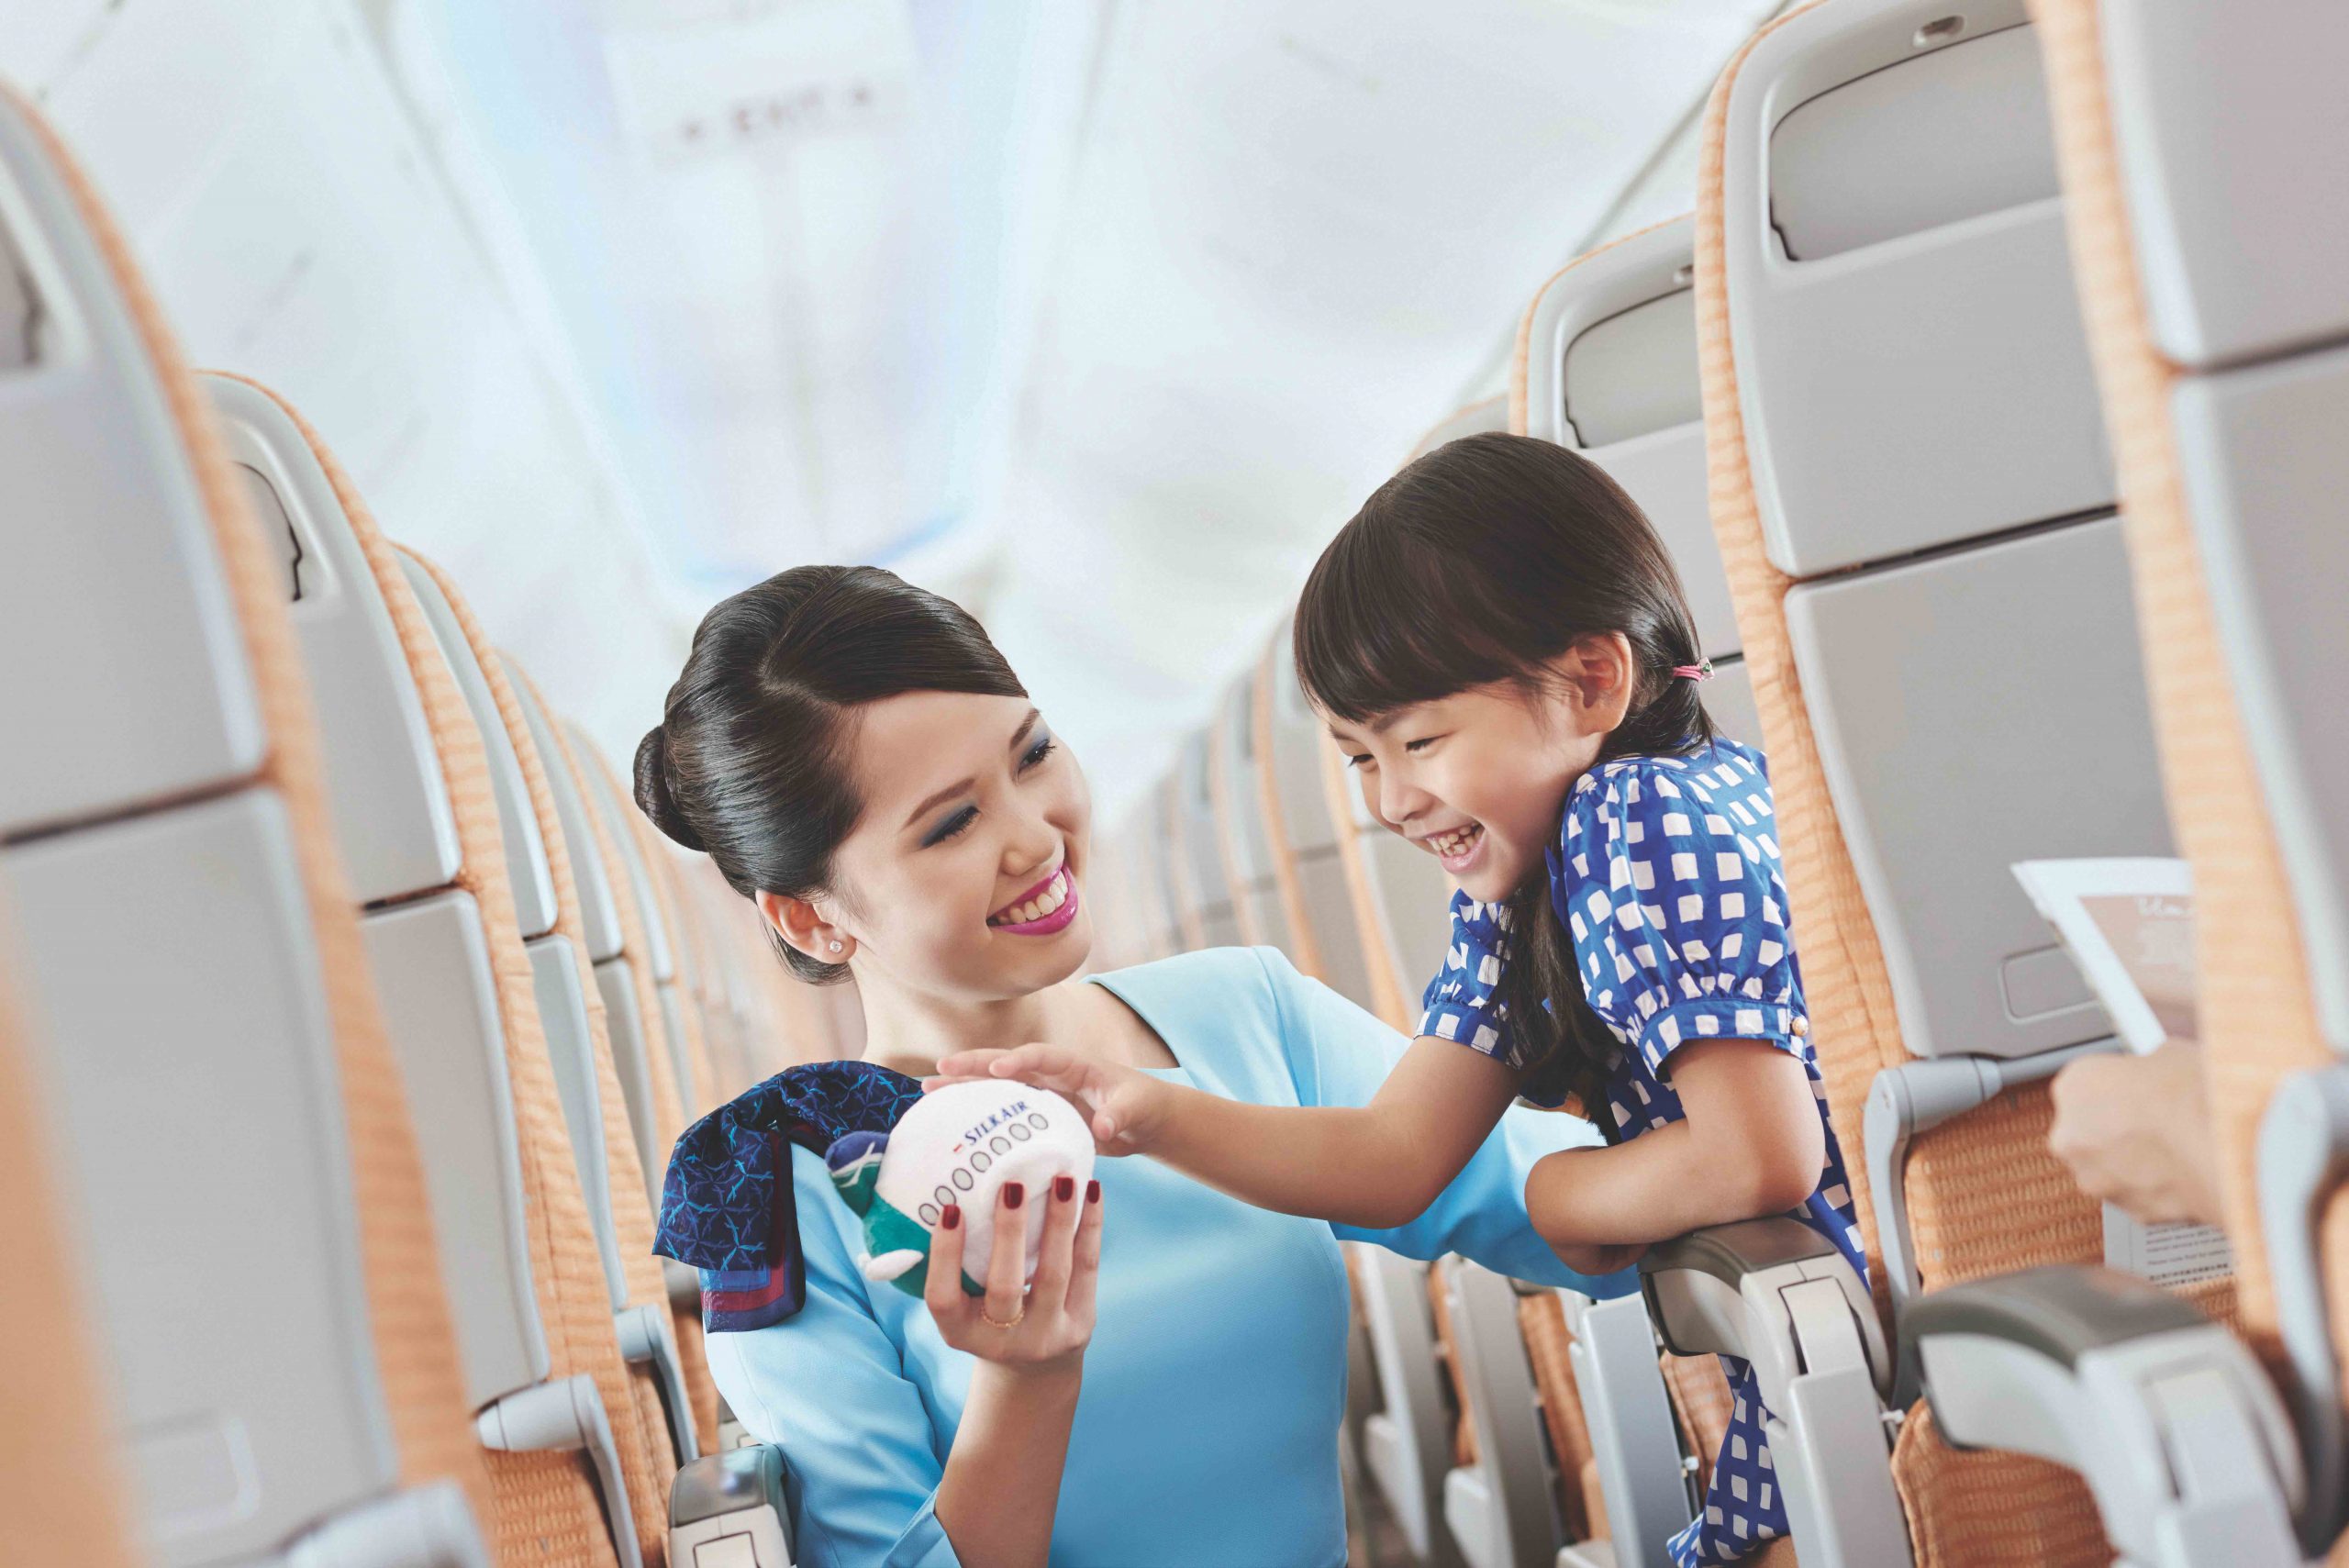 Singapore's Silk Air is Recruiting Cabin Crew: Will You Be Attending the Open Day on 8th January?